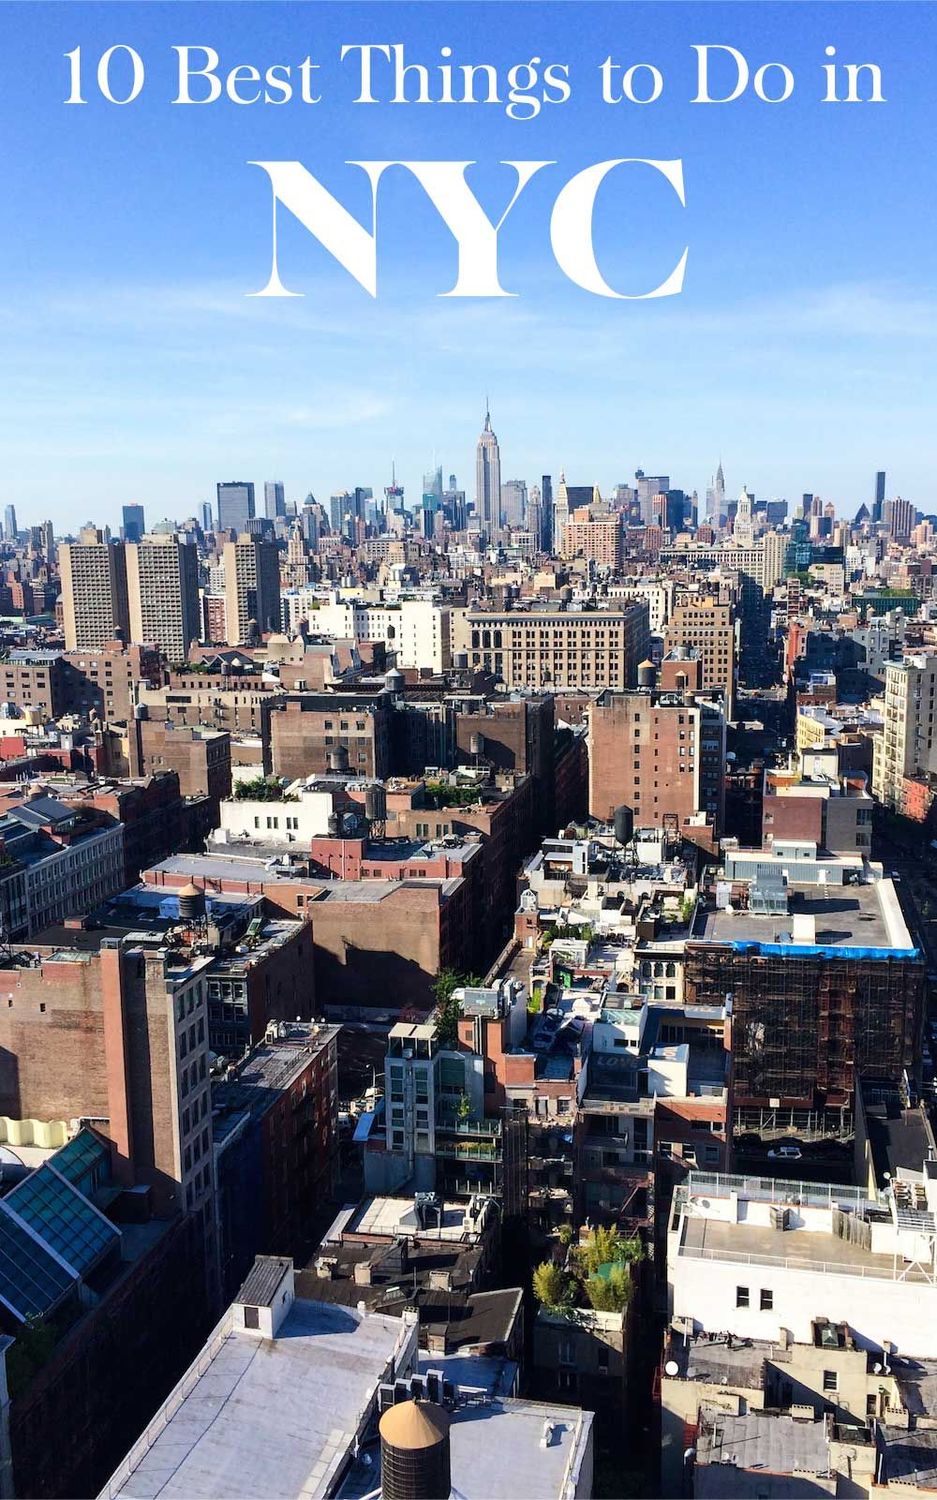 10 Best Things To Do in NYC #nyc #nyctravel #nycguide #travelnyc #nyctips